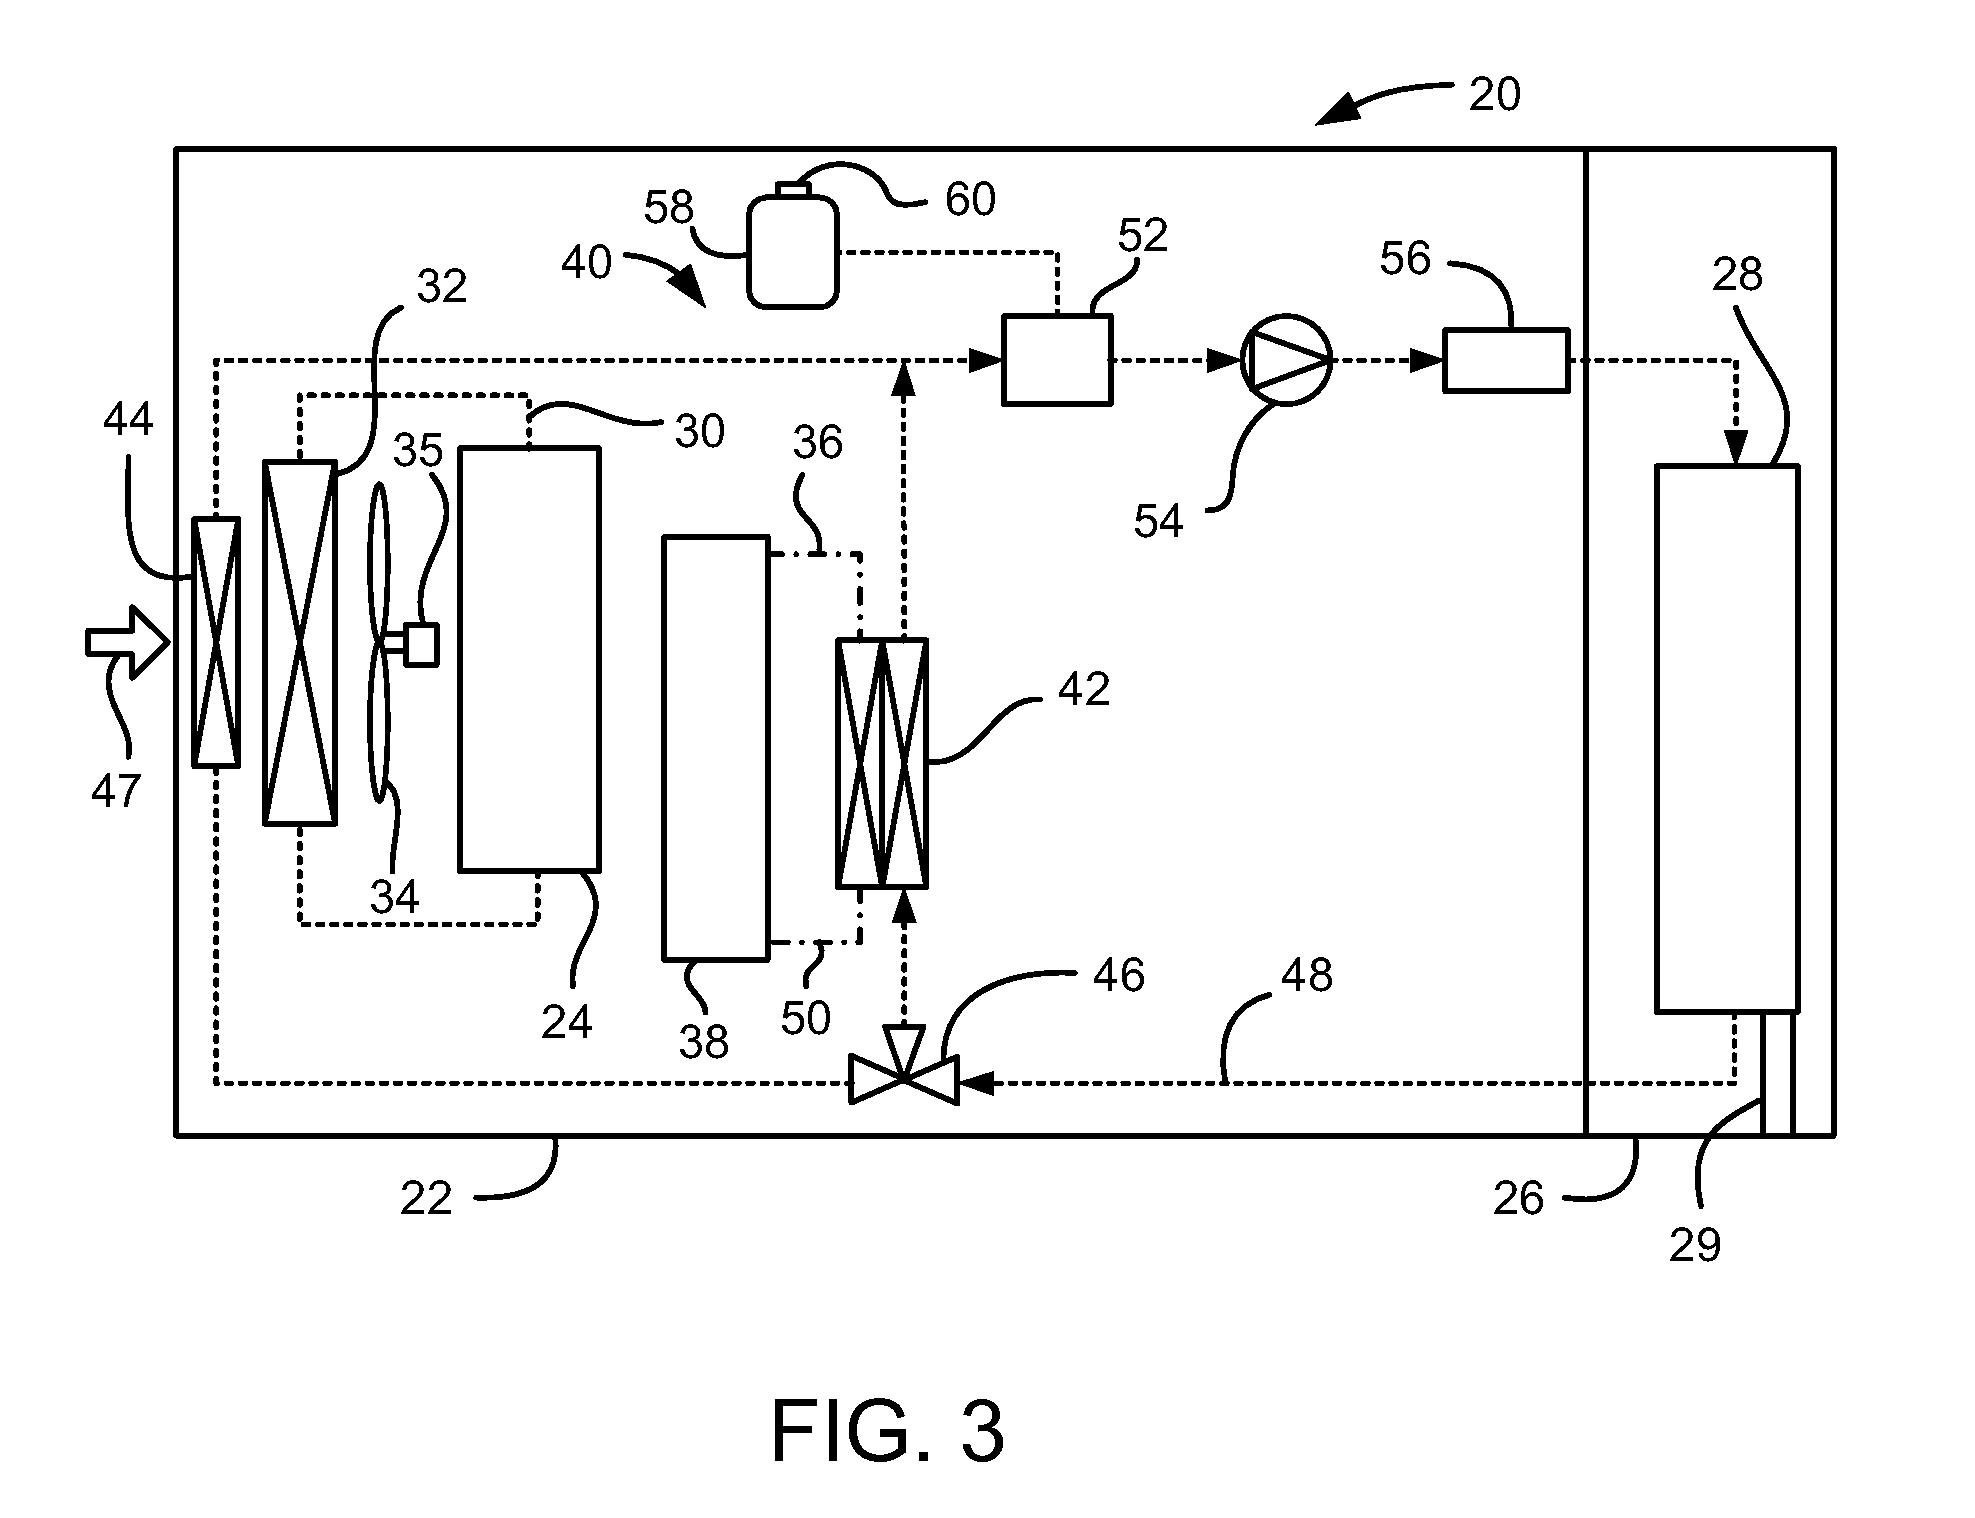 Battery thermal system for vehicle